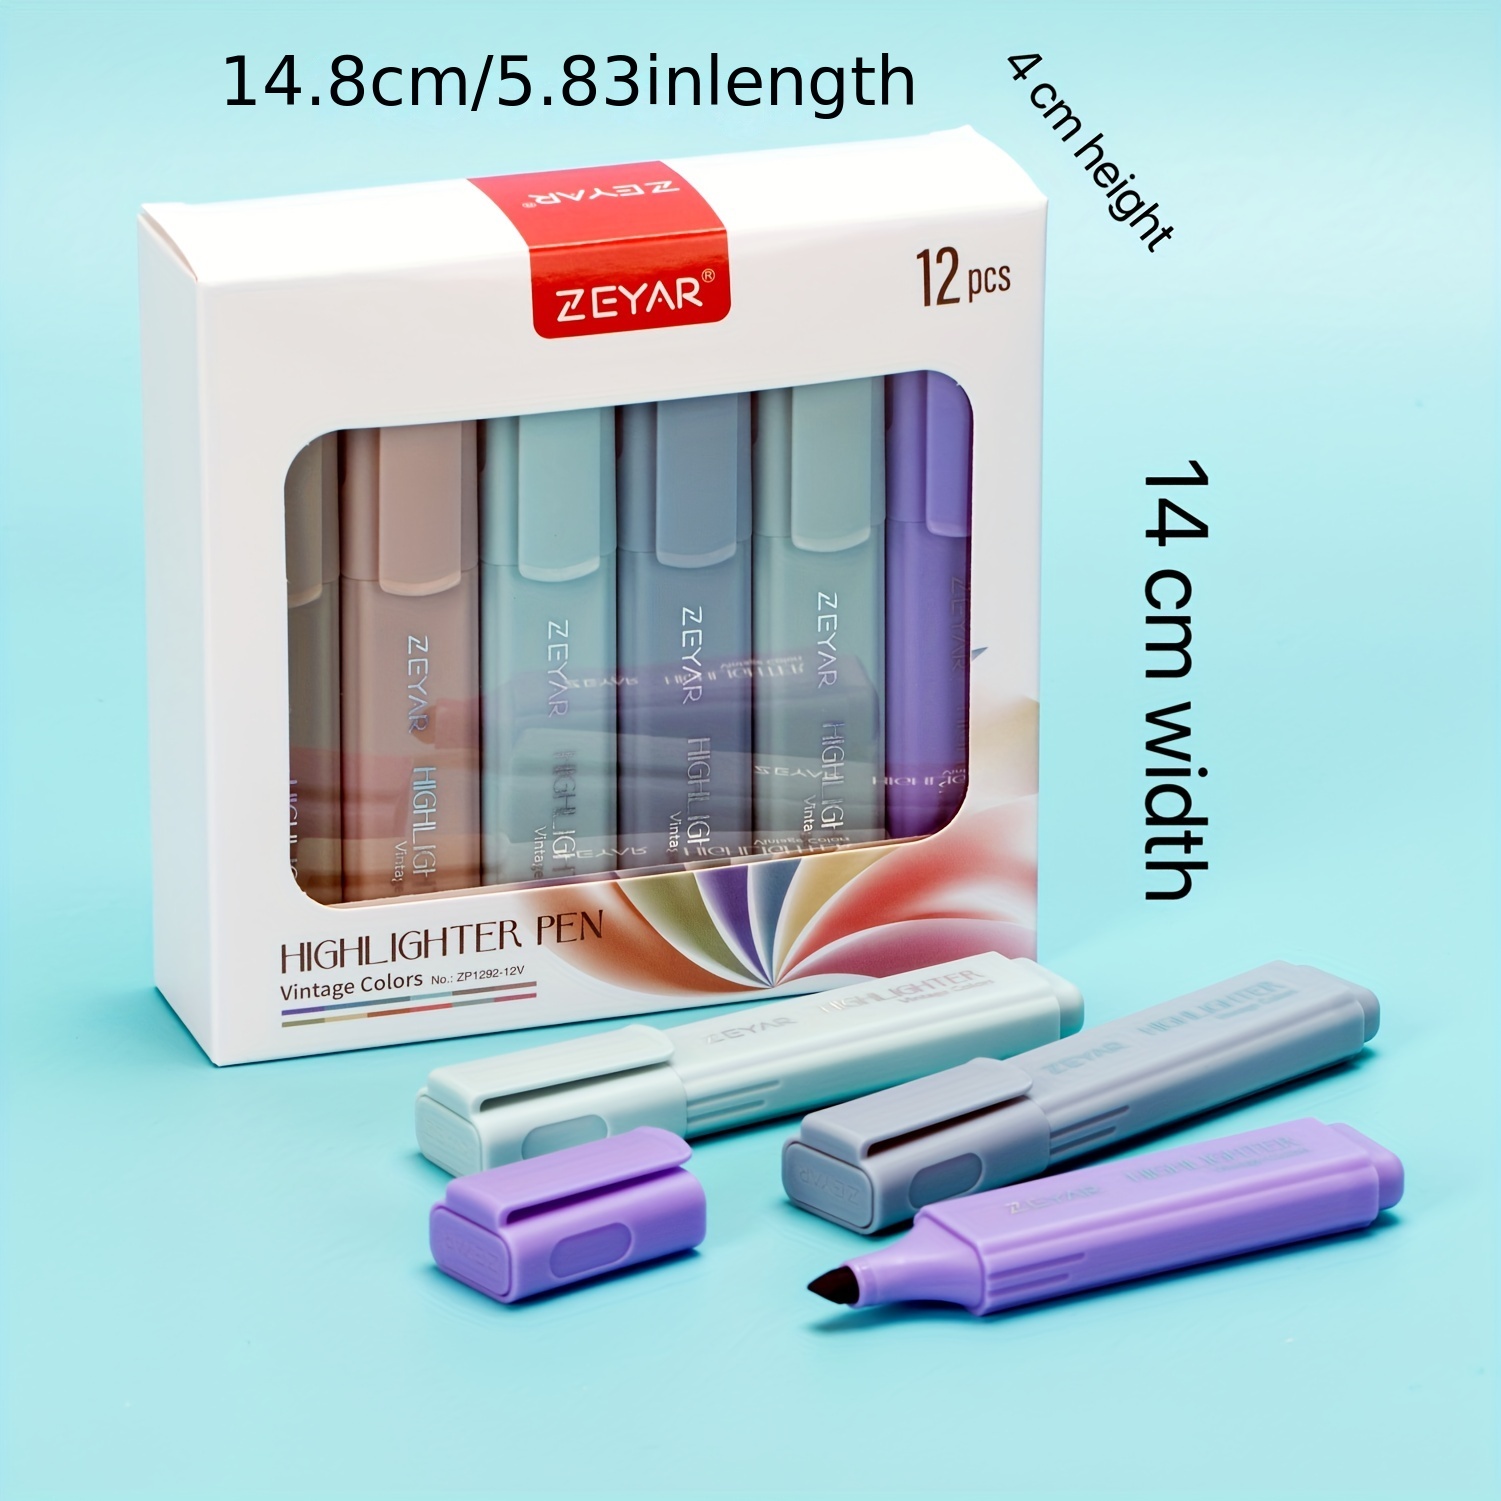 Aesthetic Pens, 10 Pack, Assorted Colors, Fast Dry, No Smear Bible